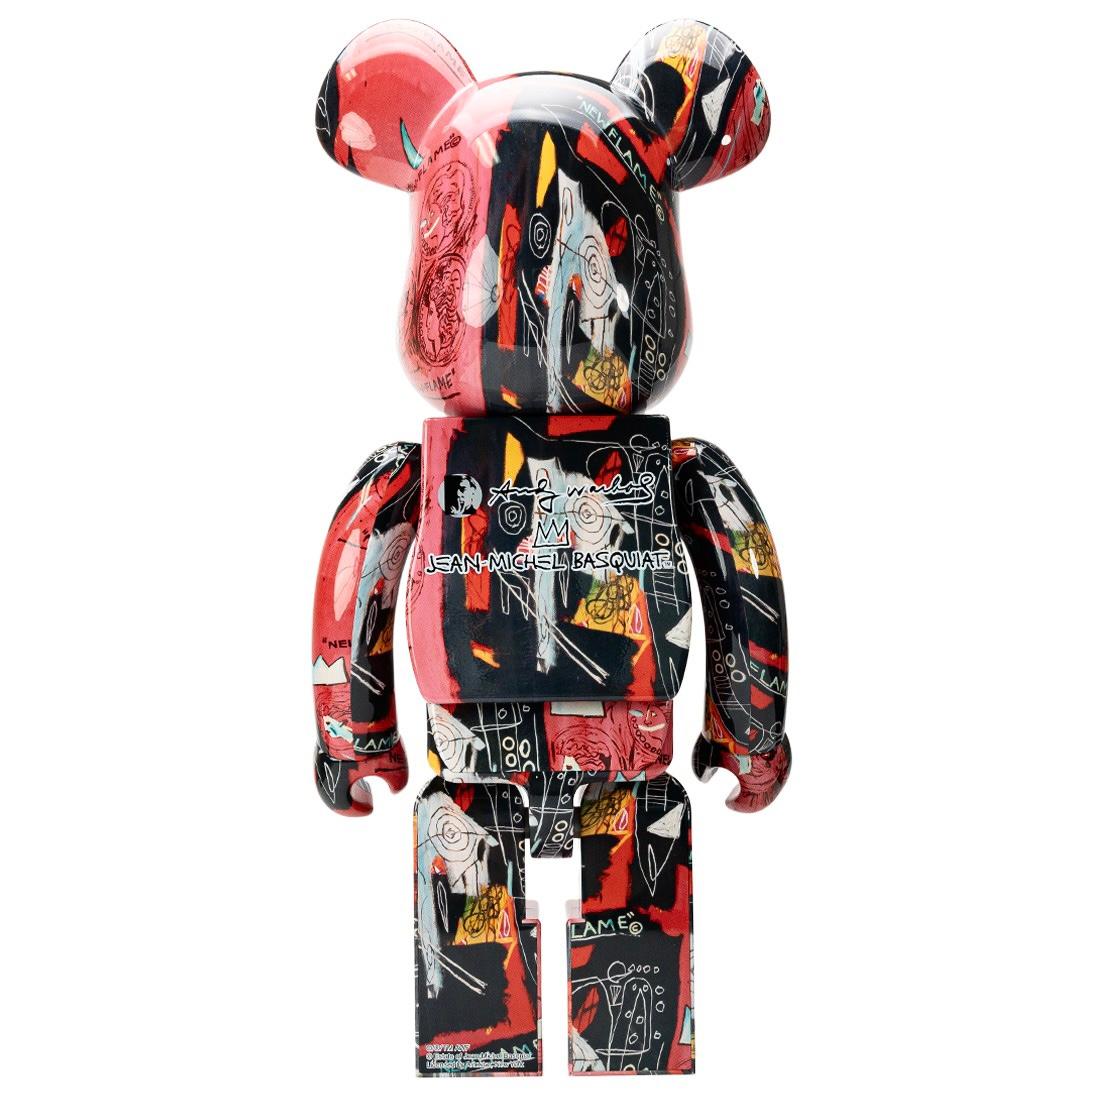 bearbrick sizes in inches